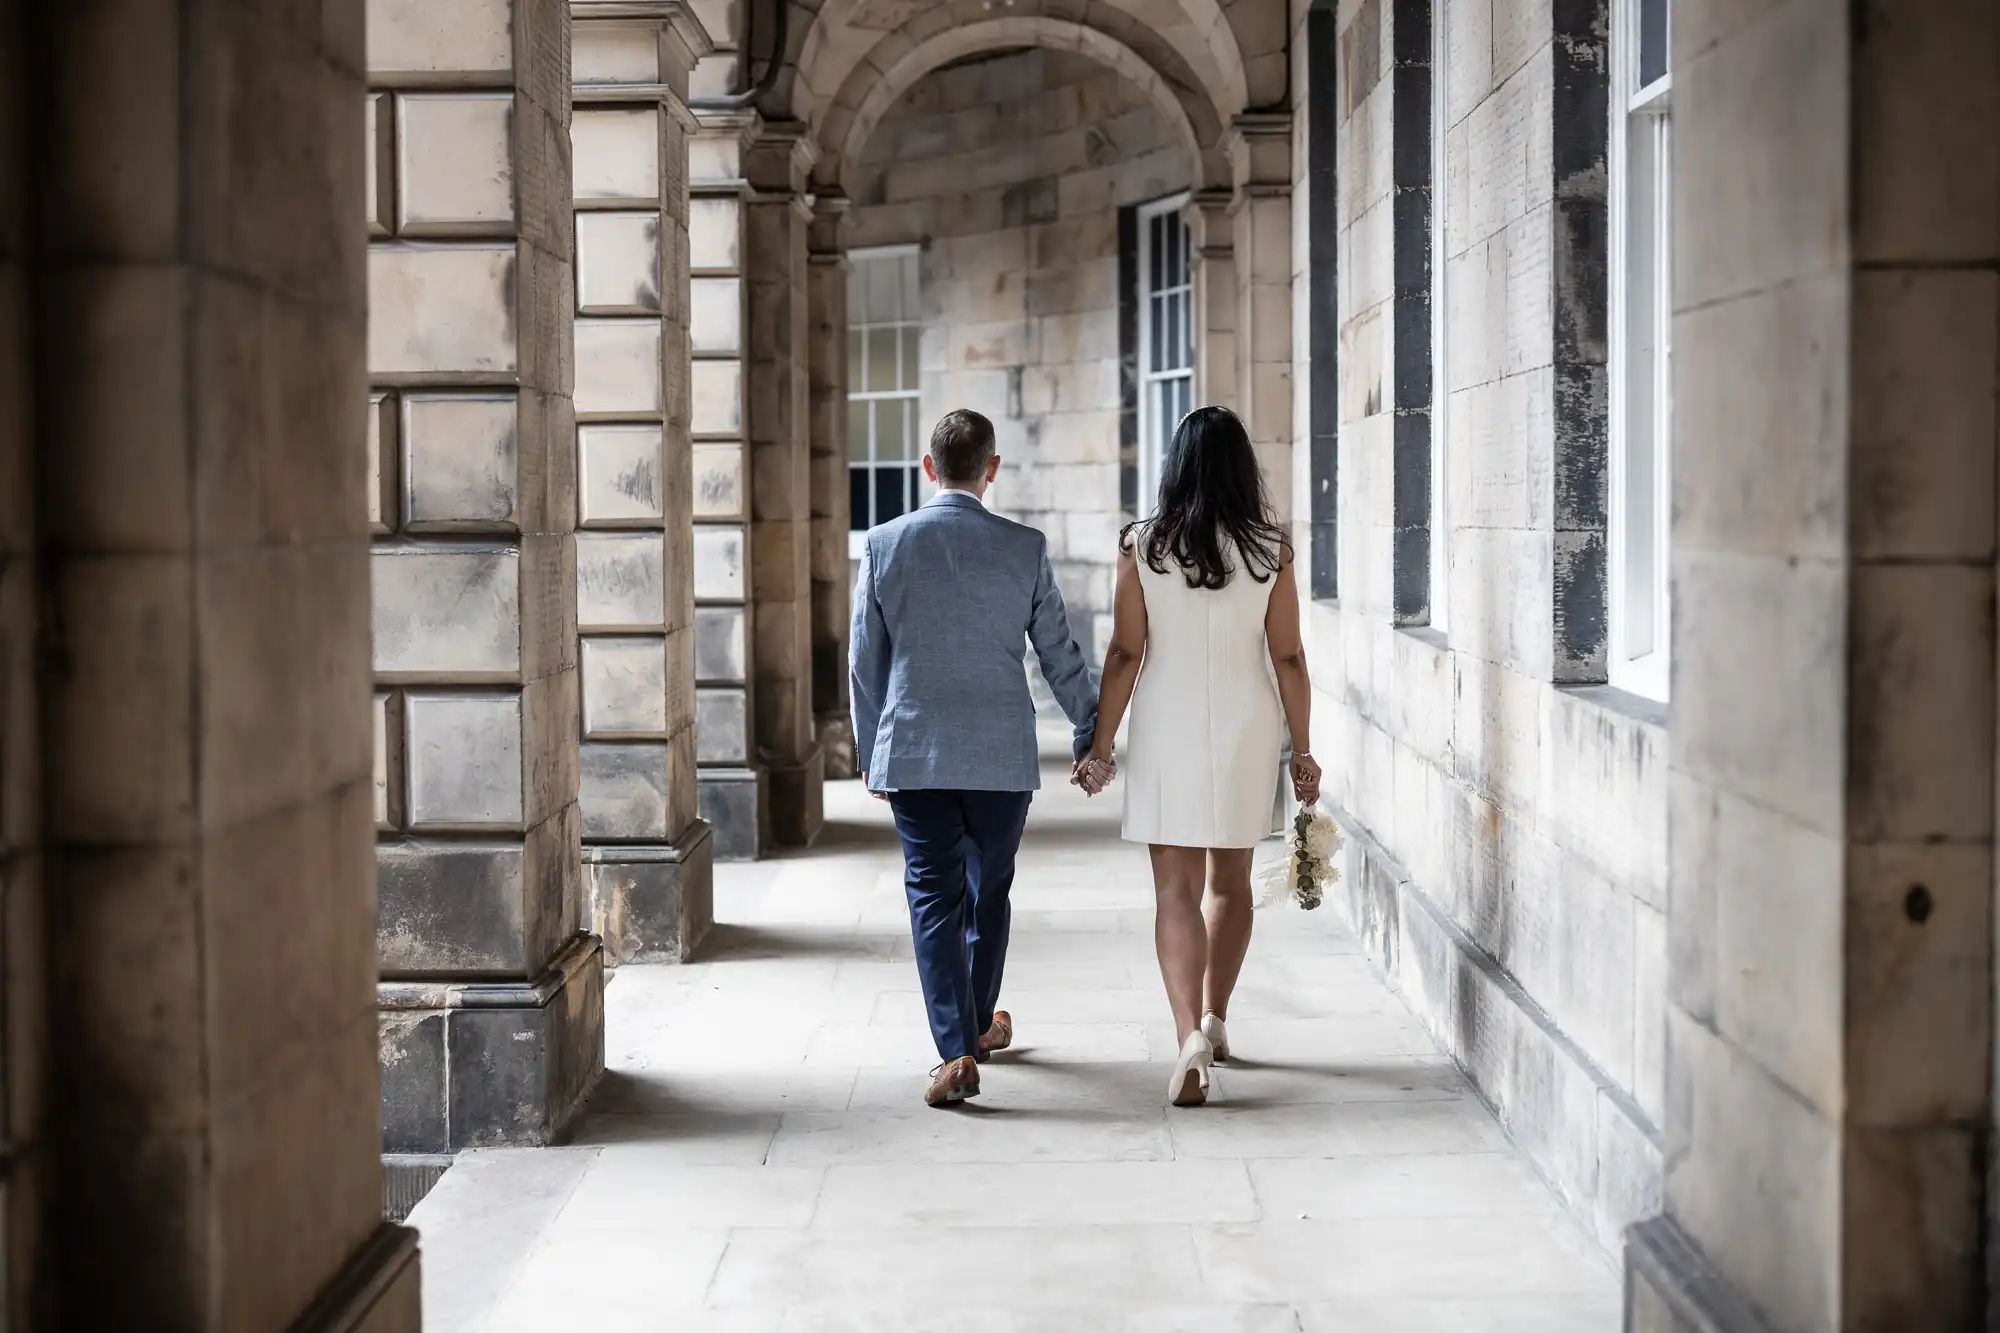 A couple holding hands walks down a stone corridor with high arched ceilings. The man is wearing a blue suit and the woman is in a white dress, holding a small bouquet.